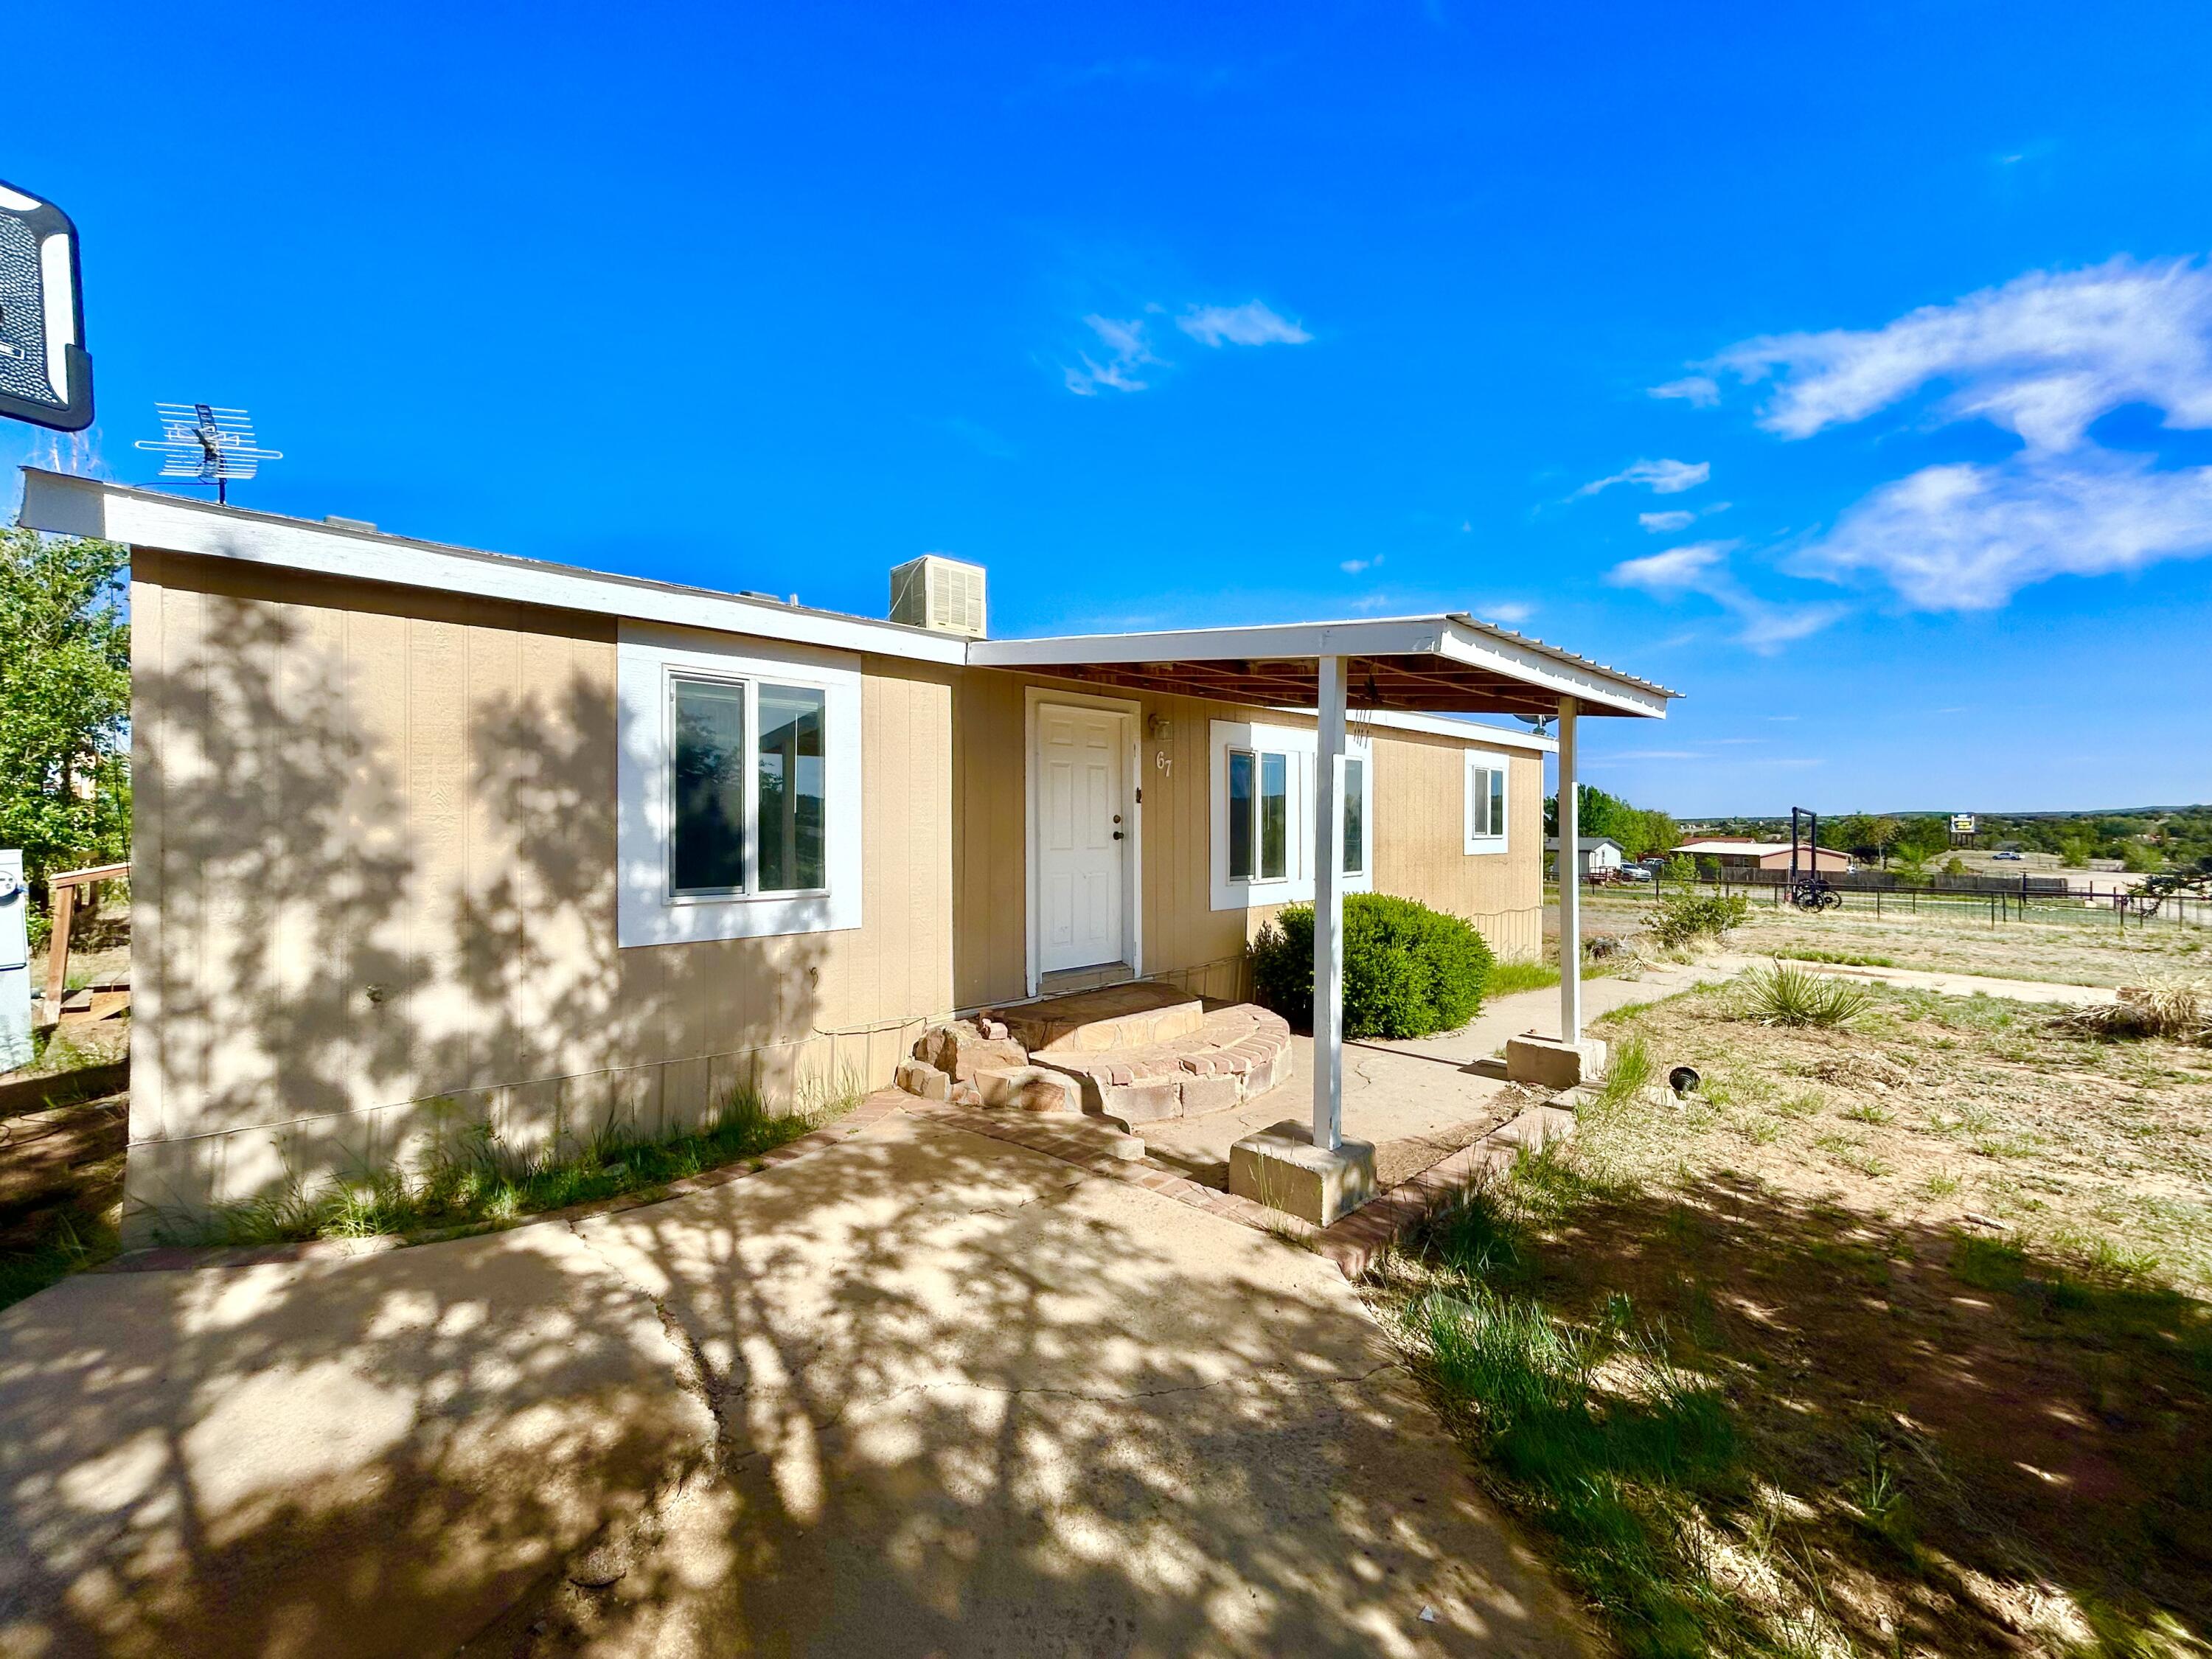 Welcome to Edgewood New Mexico.   3 bedroom 2 bathroom split floor plan.    Refrigerated  air conditioning.   New plant and updated flooring.